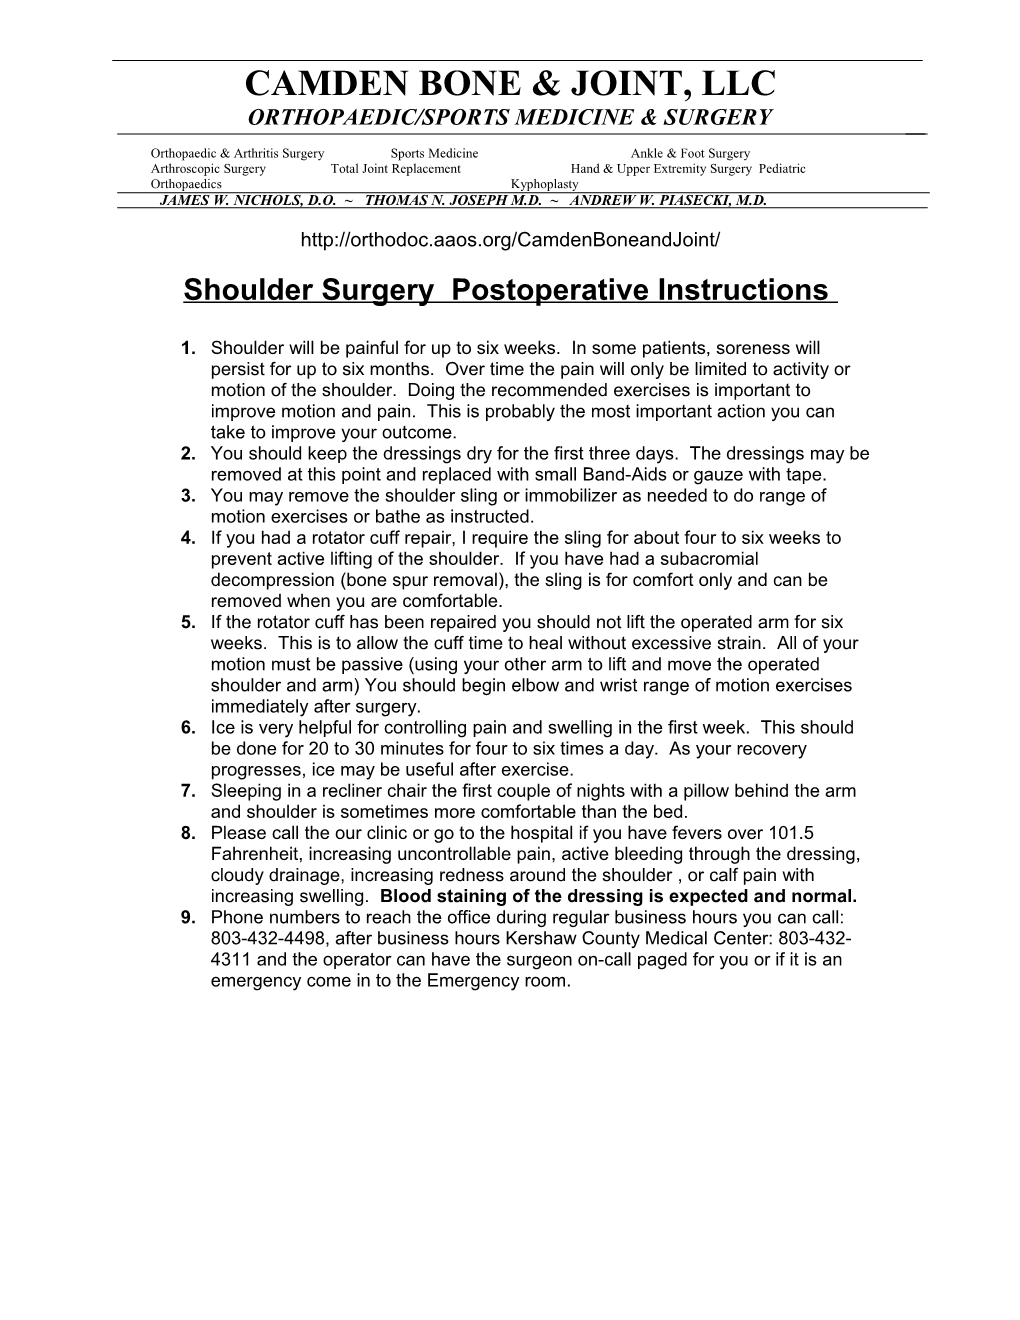 Postoperative for Shoulder Surgery Instructions